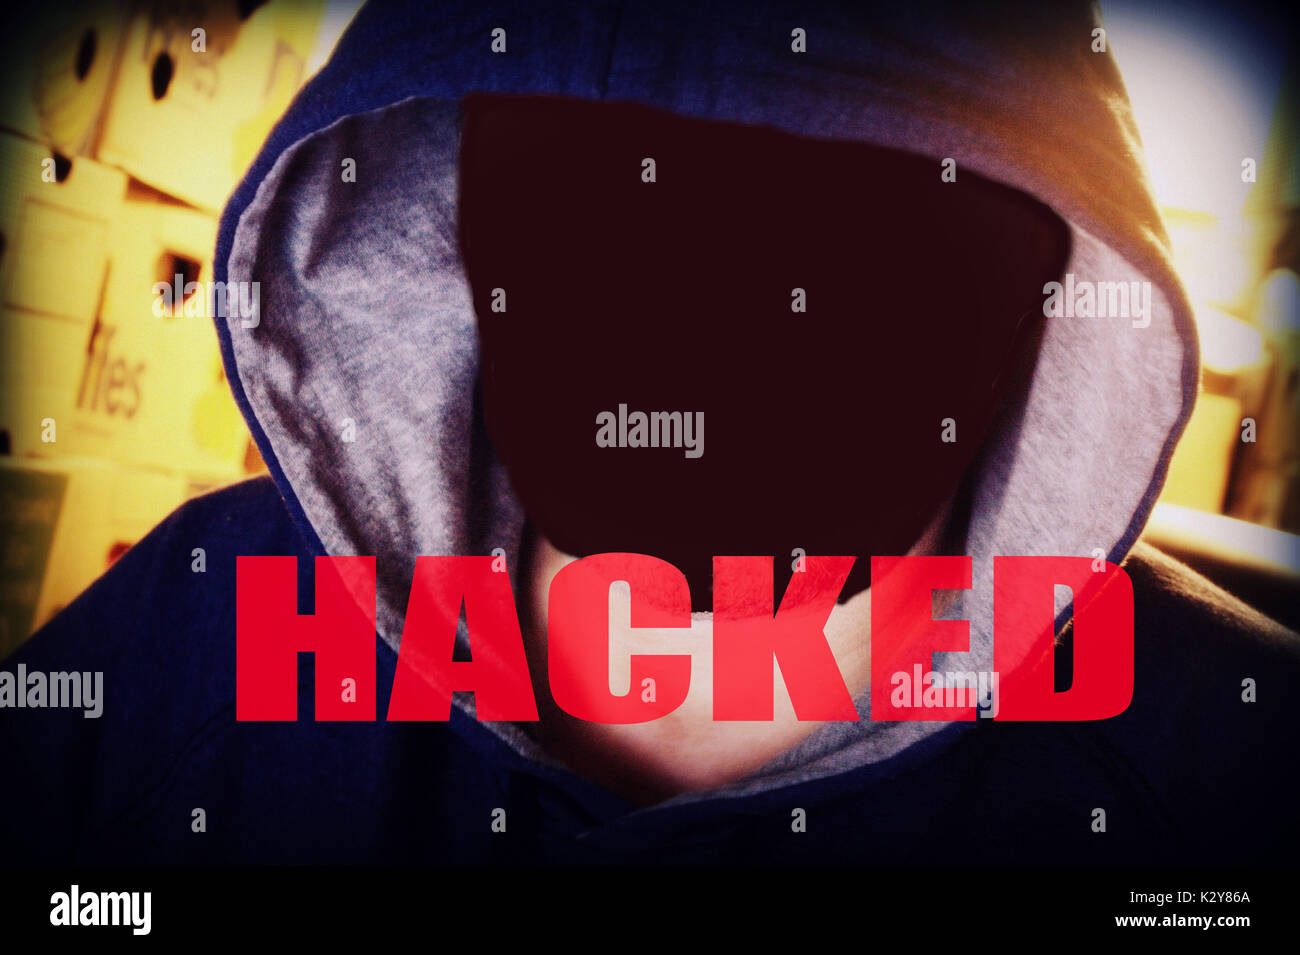 Hacker hacked victim perpetrator computer scam ransom ware terrorist terror anonymous blacked out face Stock Photo